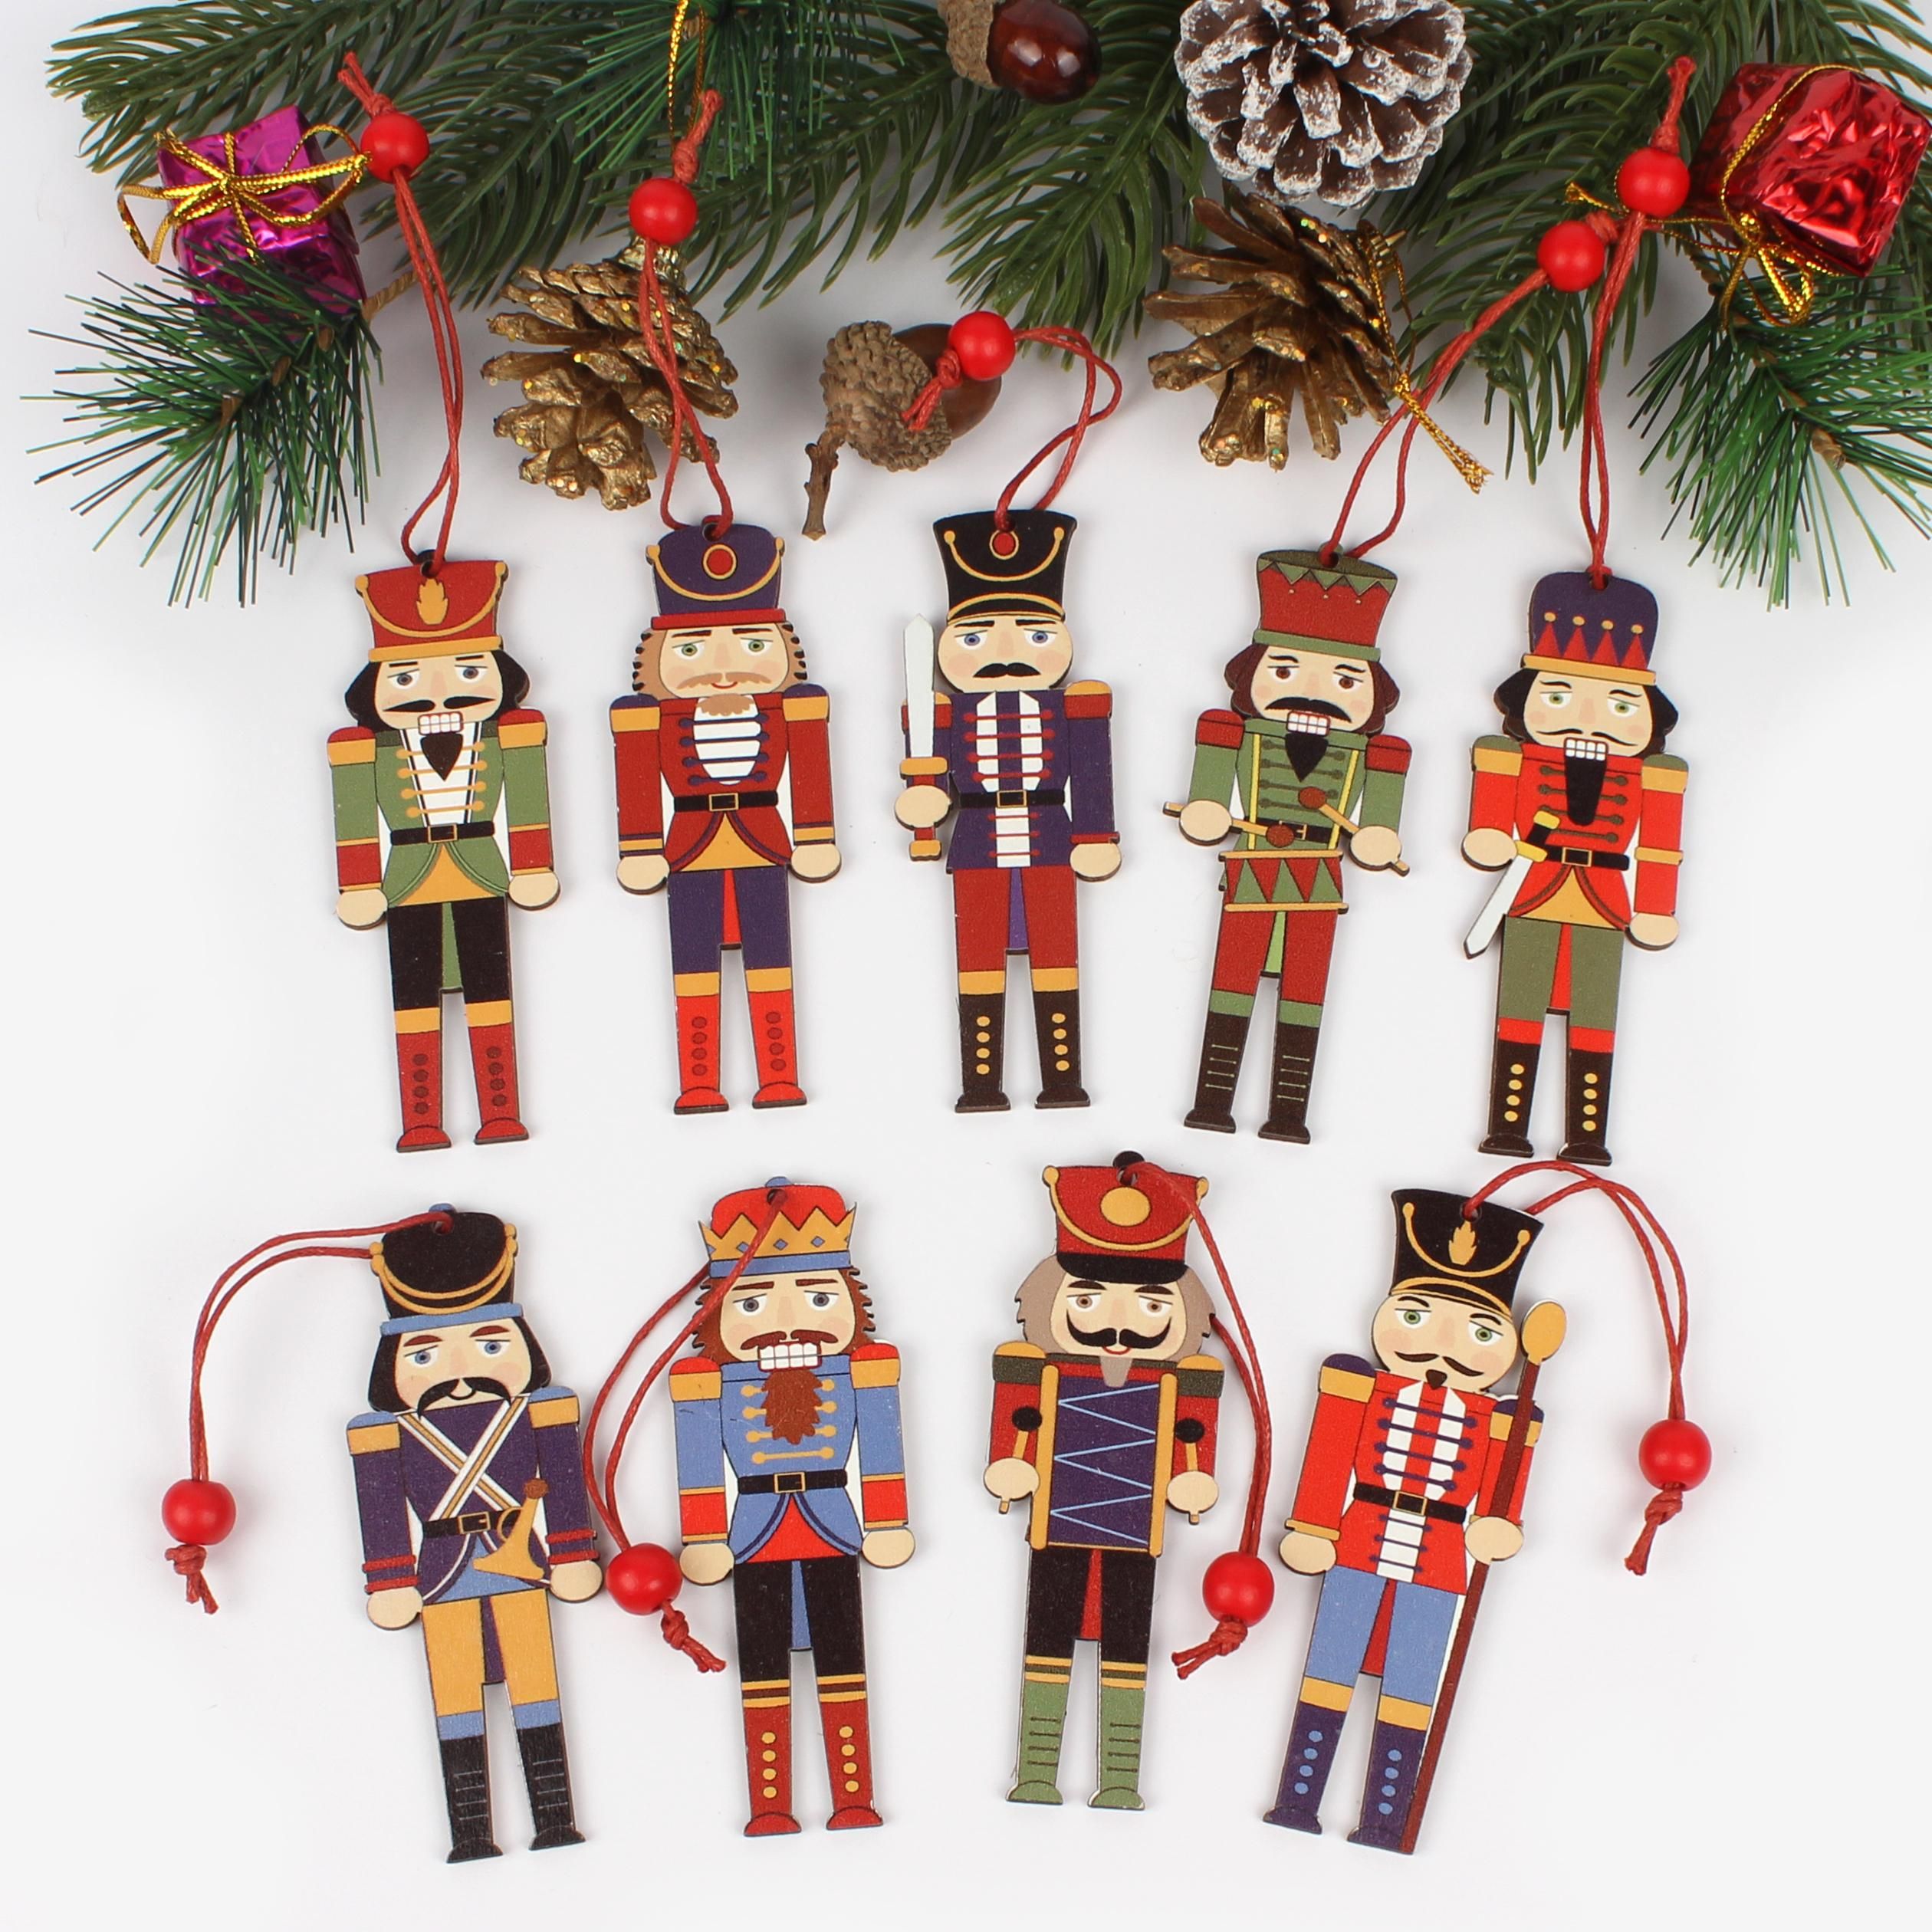 niumanery Wooden Nutcracker Soldier Merry Christmas Tree Hanging Pendant Home Decoration A